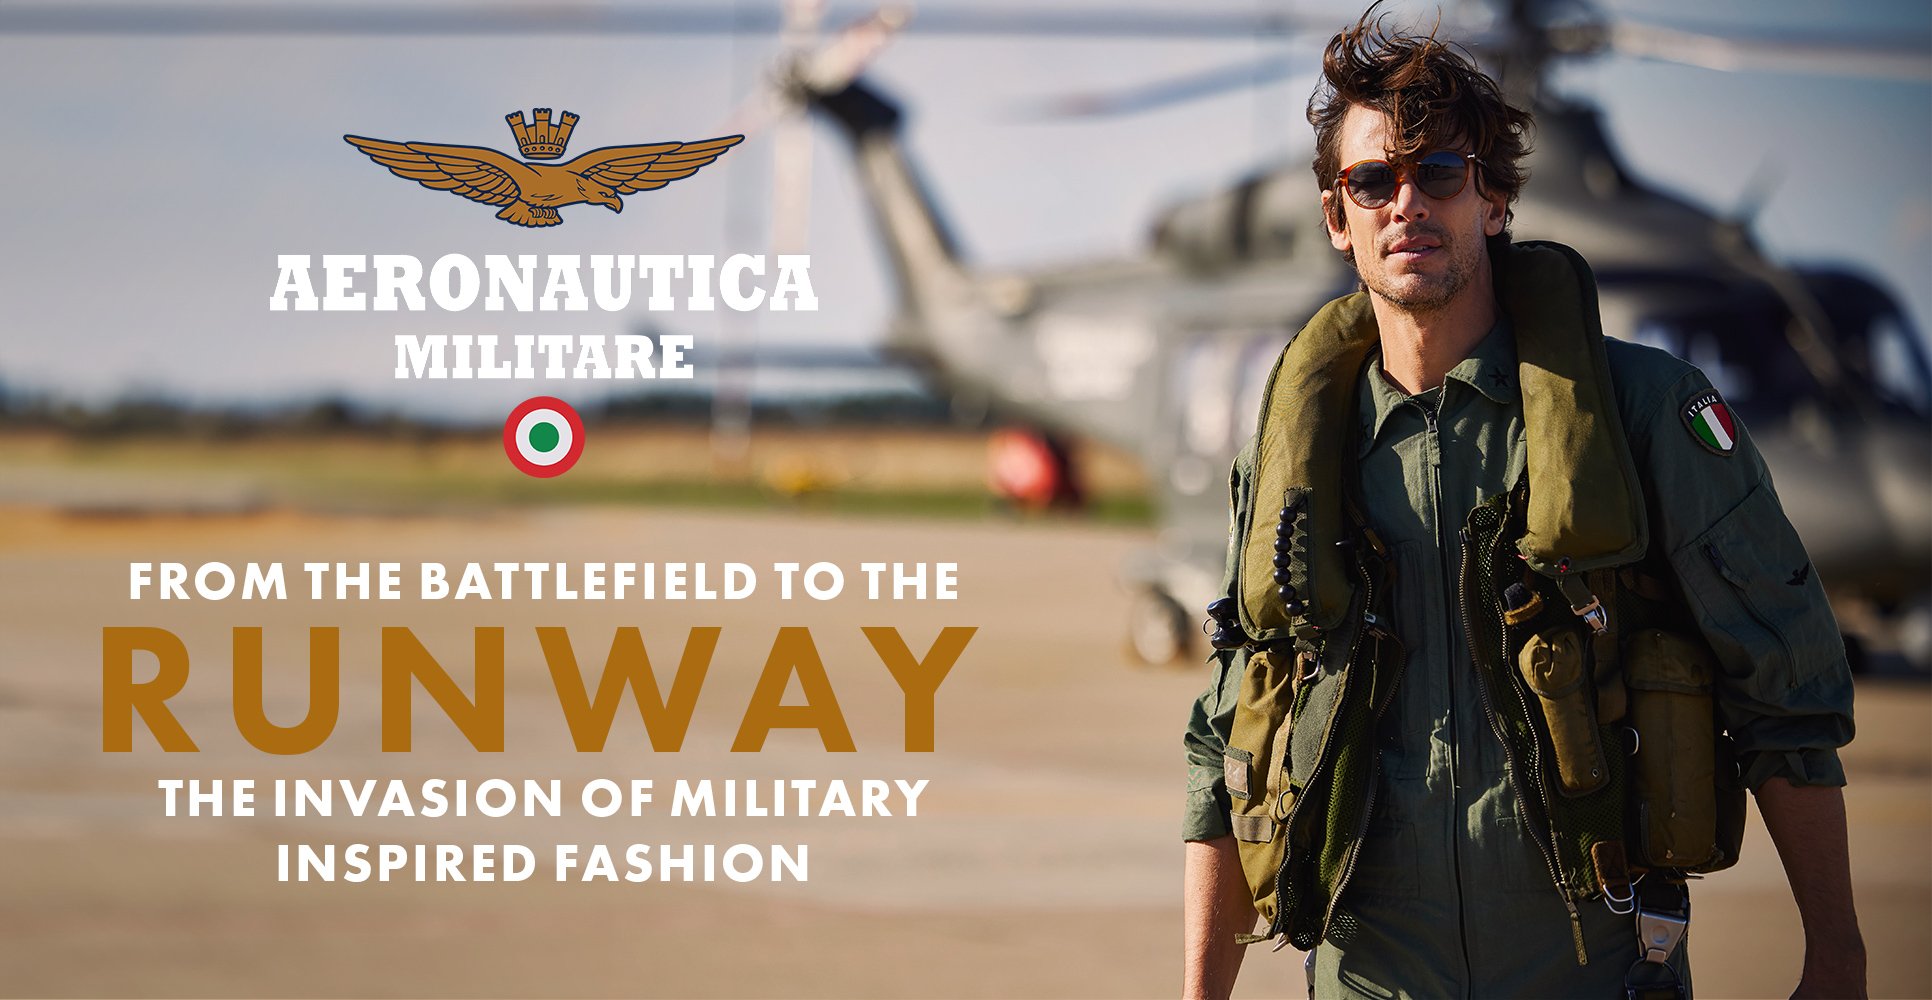 From the Battlefield to the Runway: The Invasion of Military-Inspired Fashion